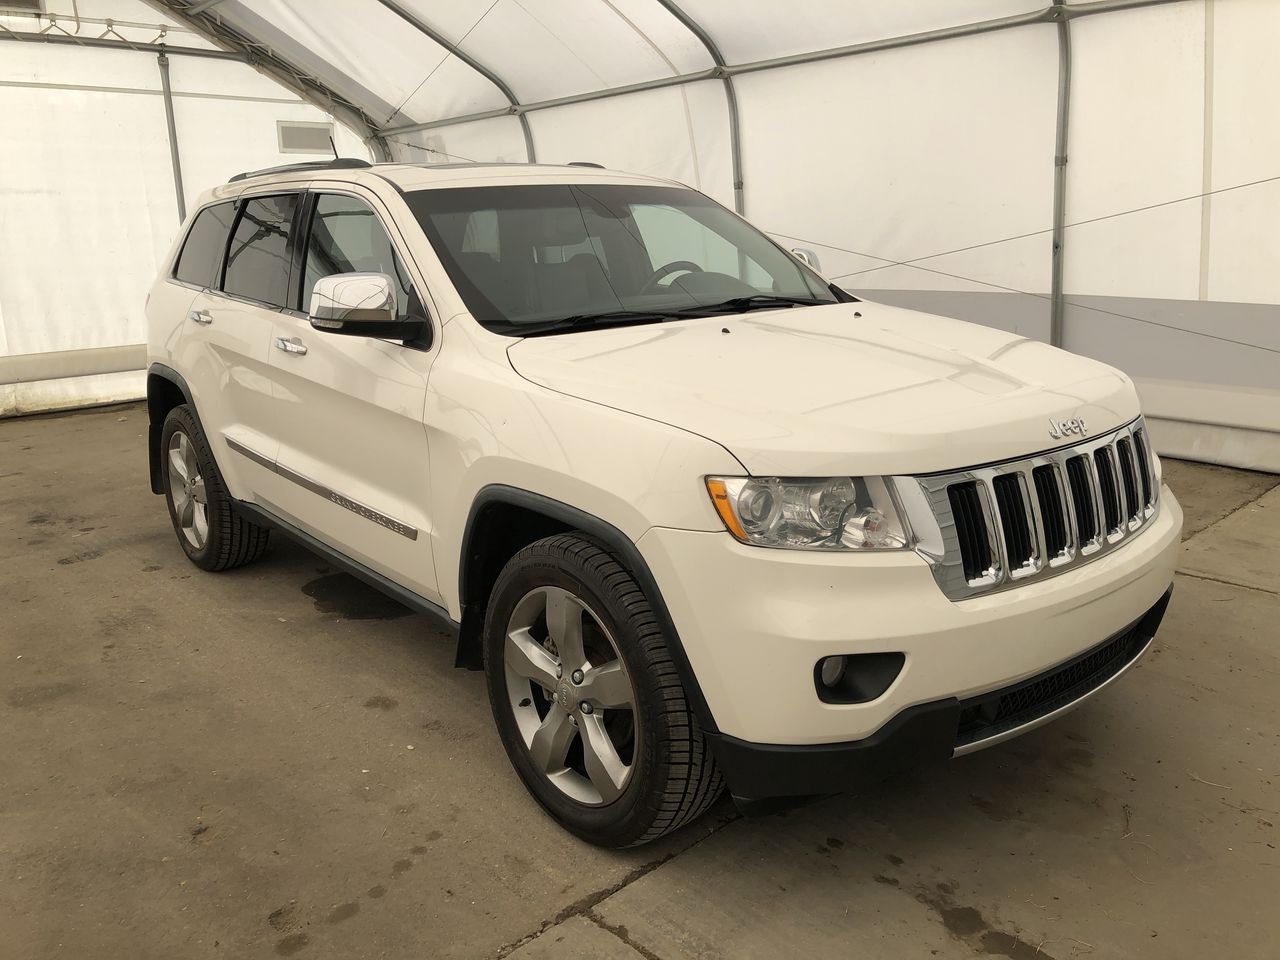 2011 Jeep Grand Cherokee Limited (N6984A) Main Image